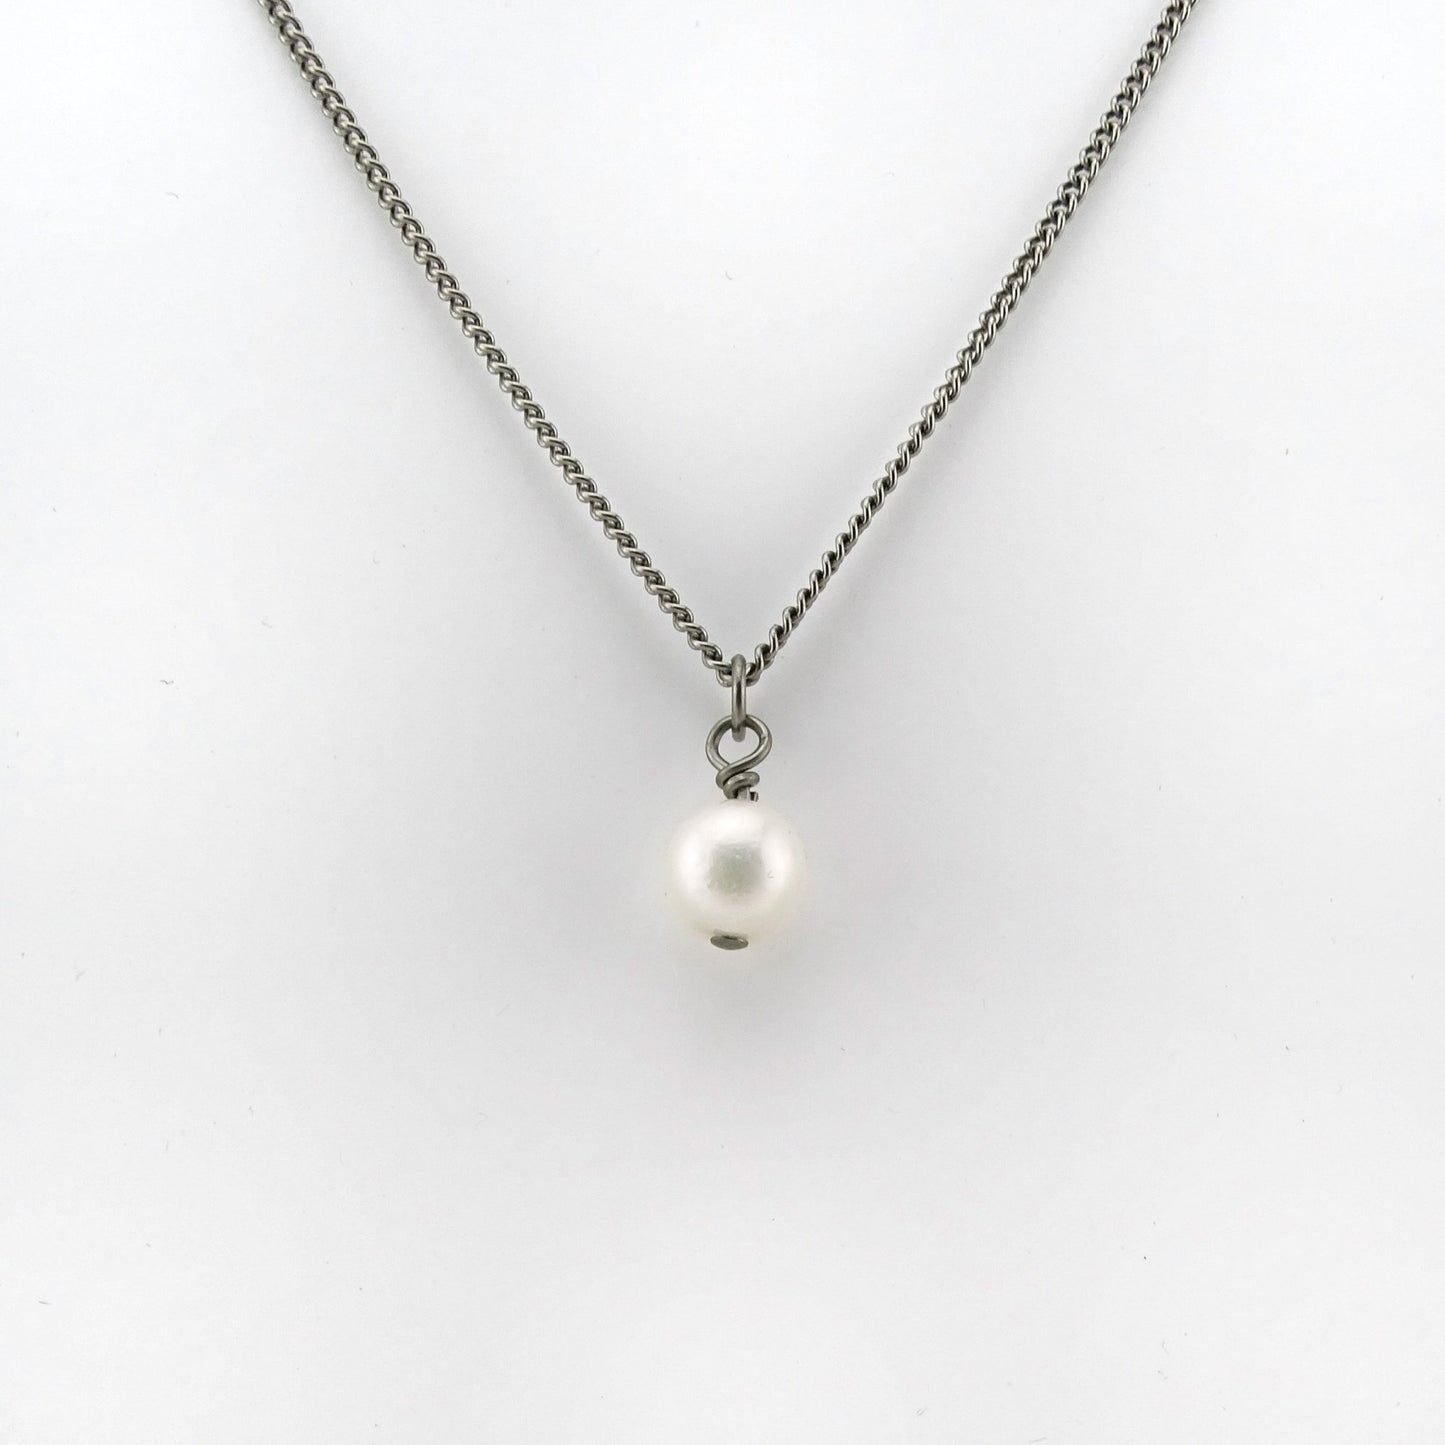 White Pearl Pendant Titanium Necklace, Real Pearl Necklace for Sensitive Skin, Freshwater Pearl Titanium Jewelry, Hypoallergenic Nickel Free